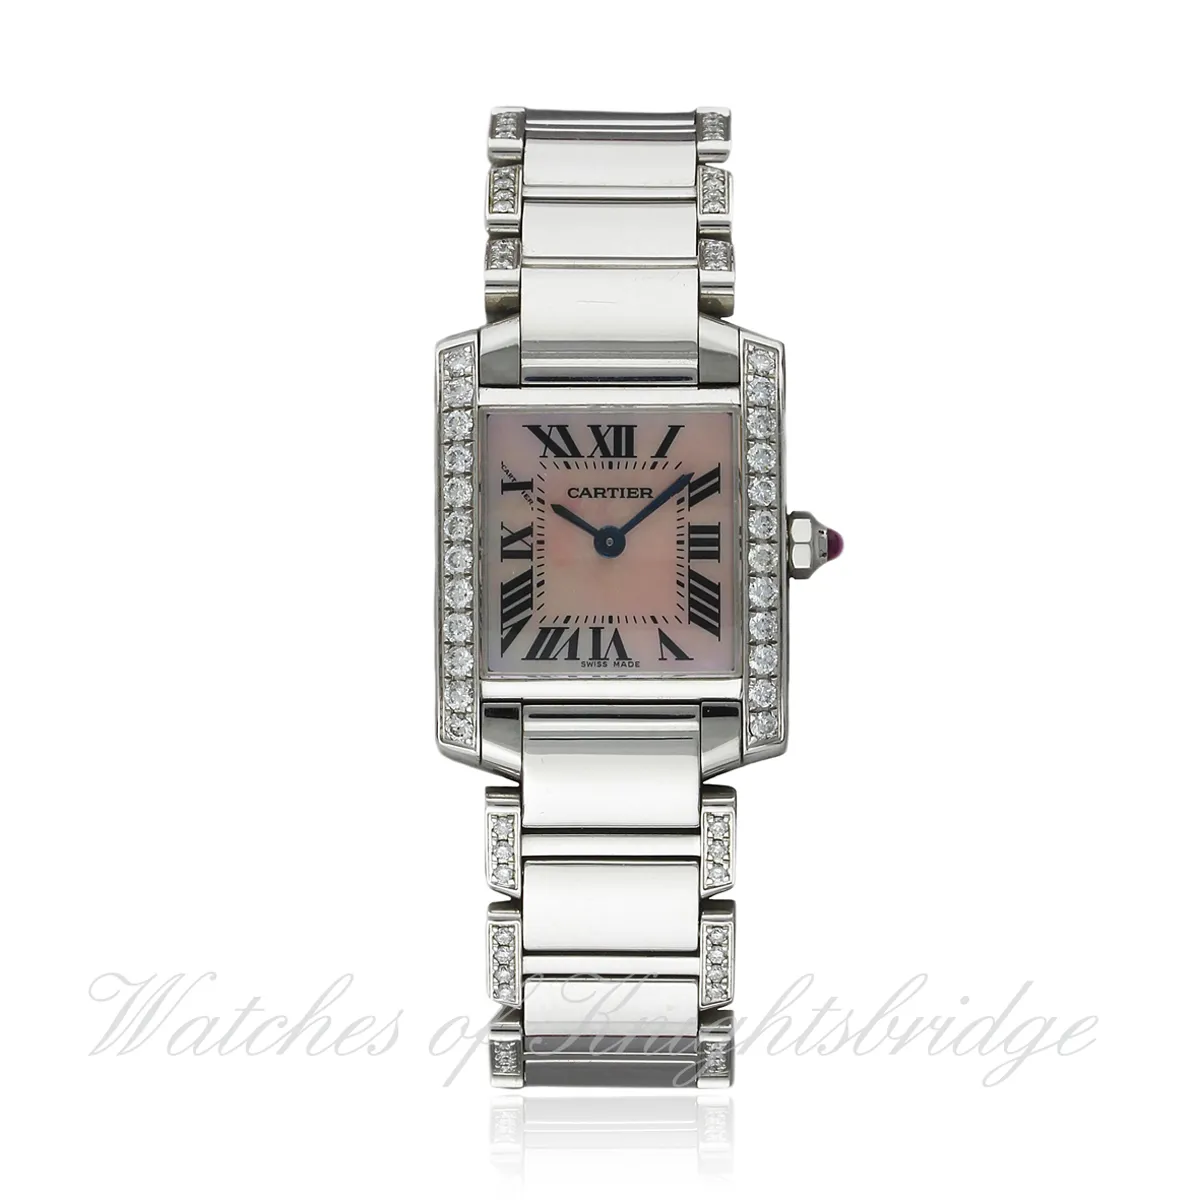 Cartier Tank 2384 20.5mm Stainless steel and diamond Mother-of-pearl